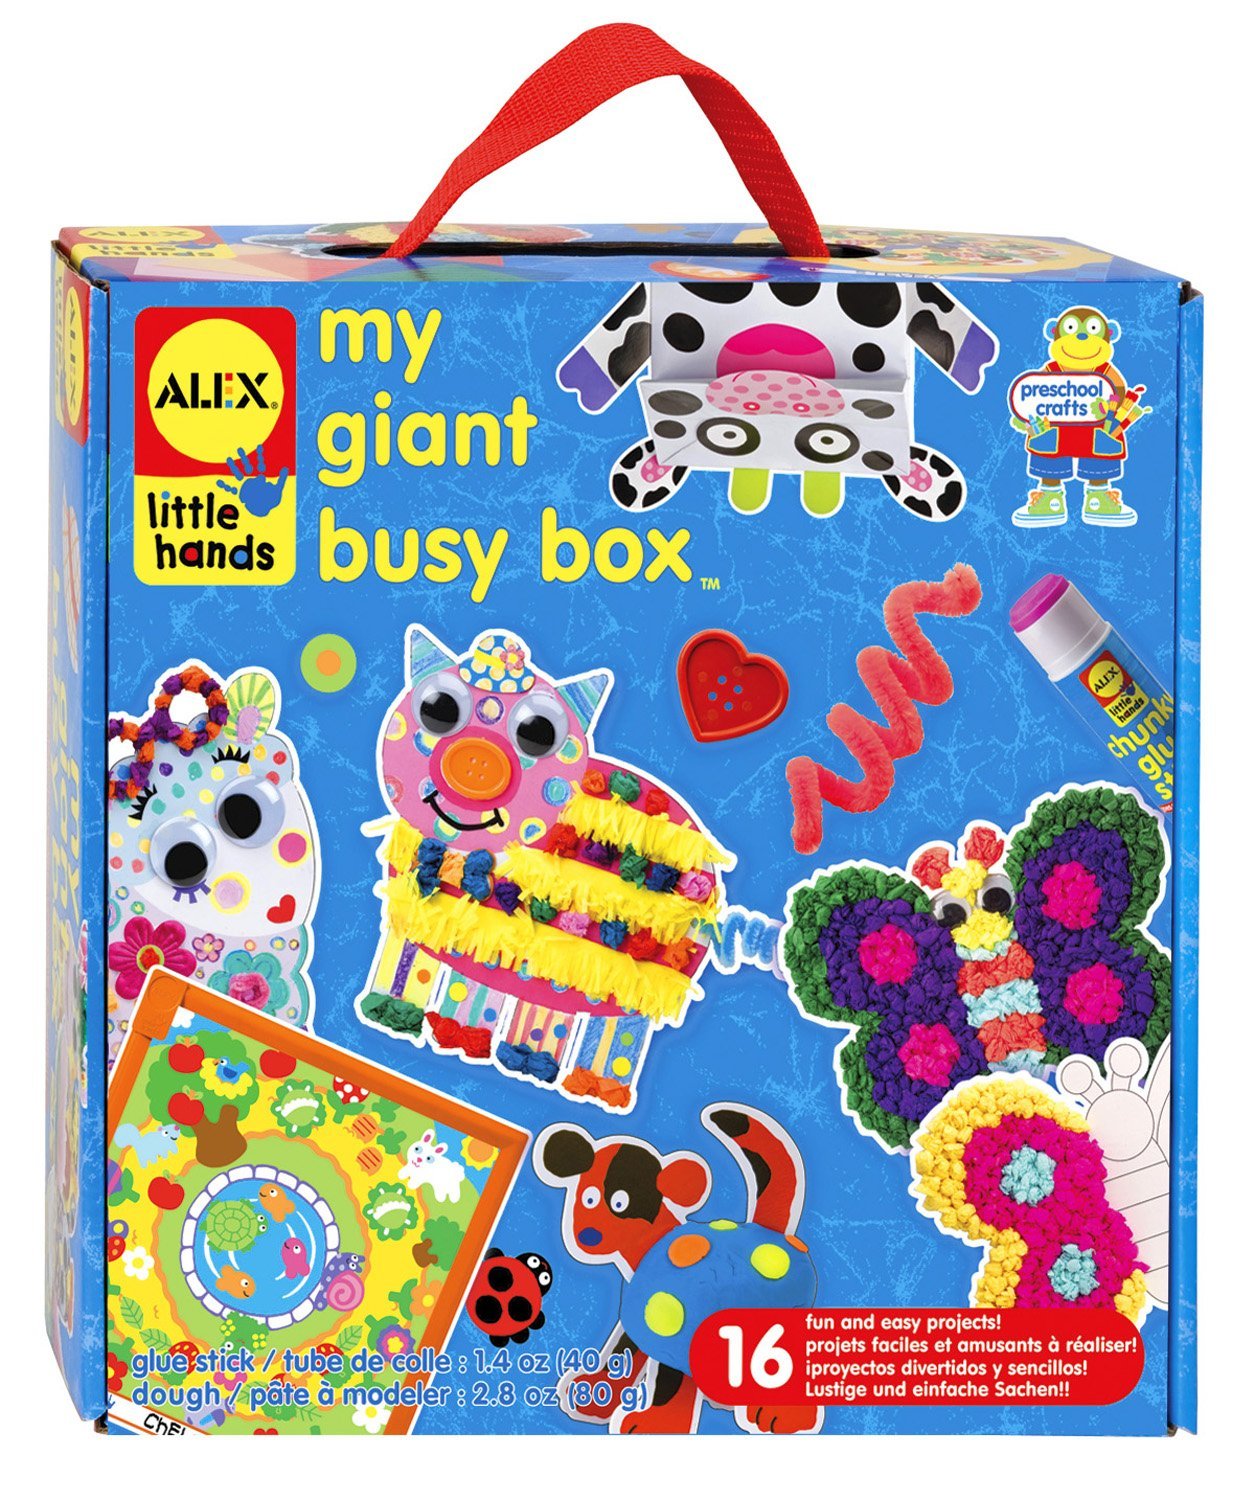 Giant Busy Box